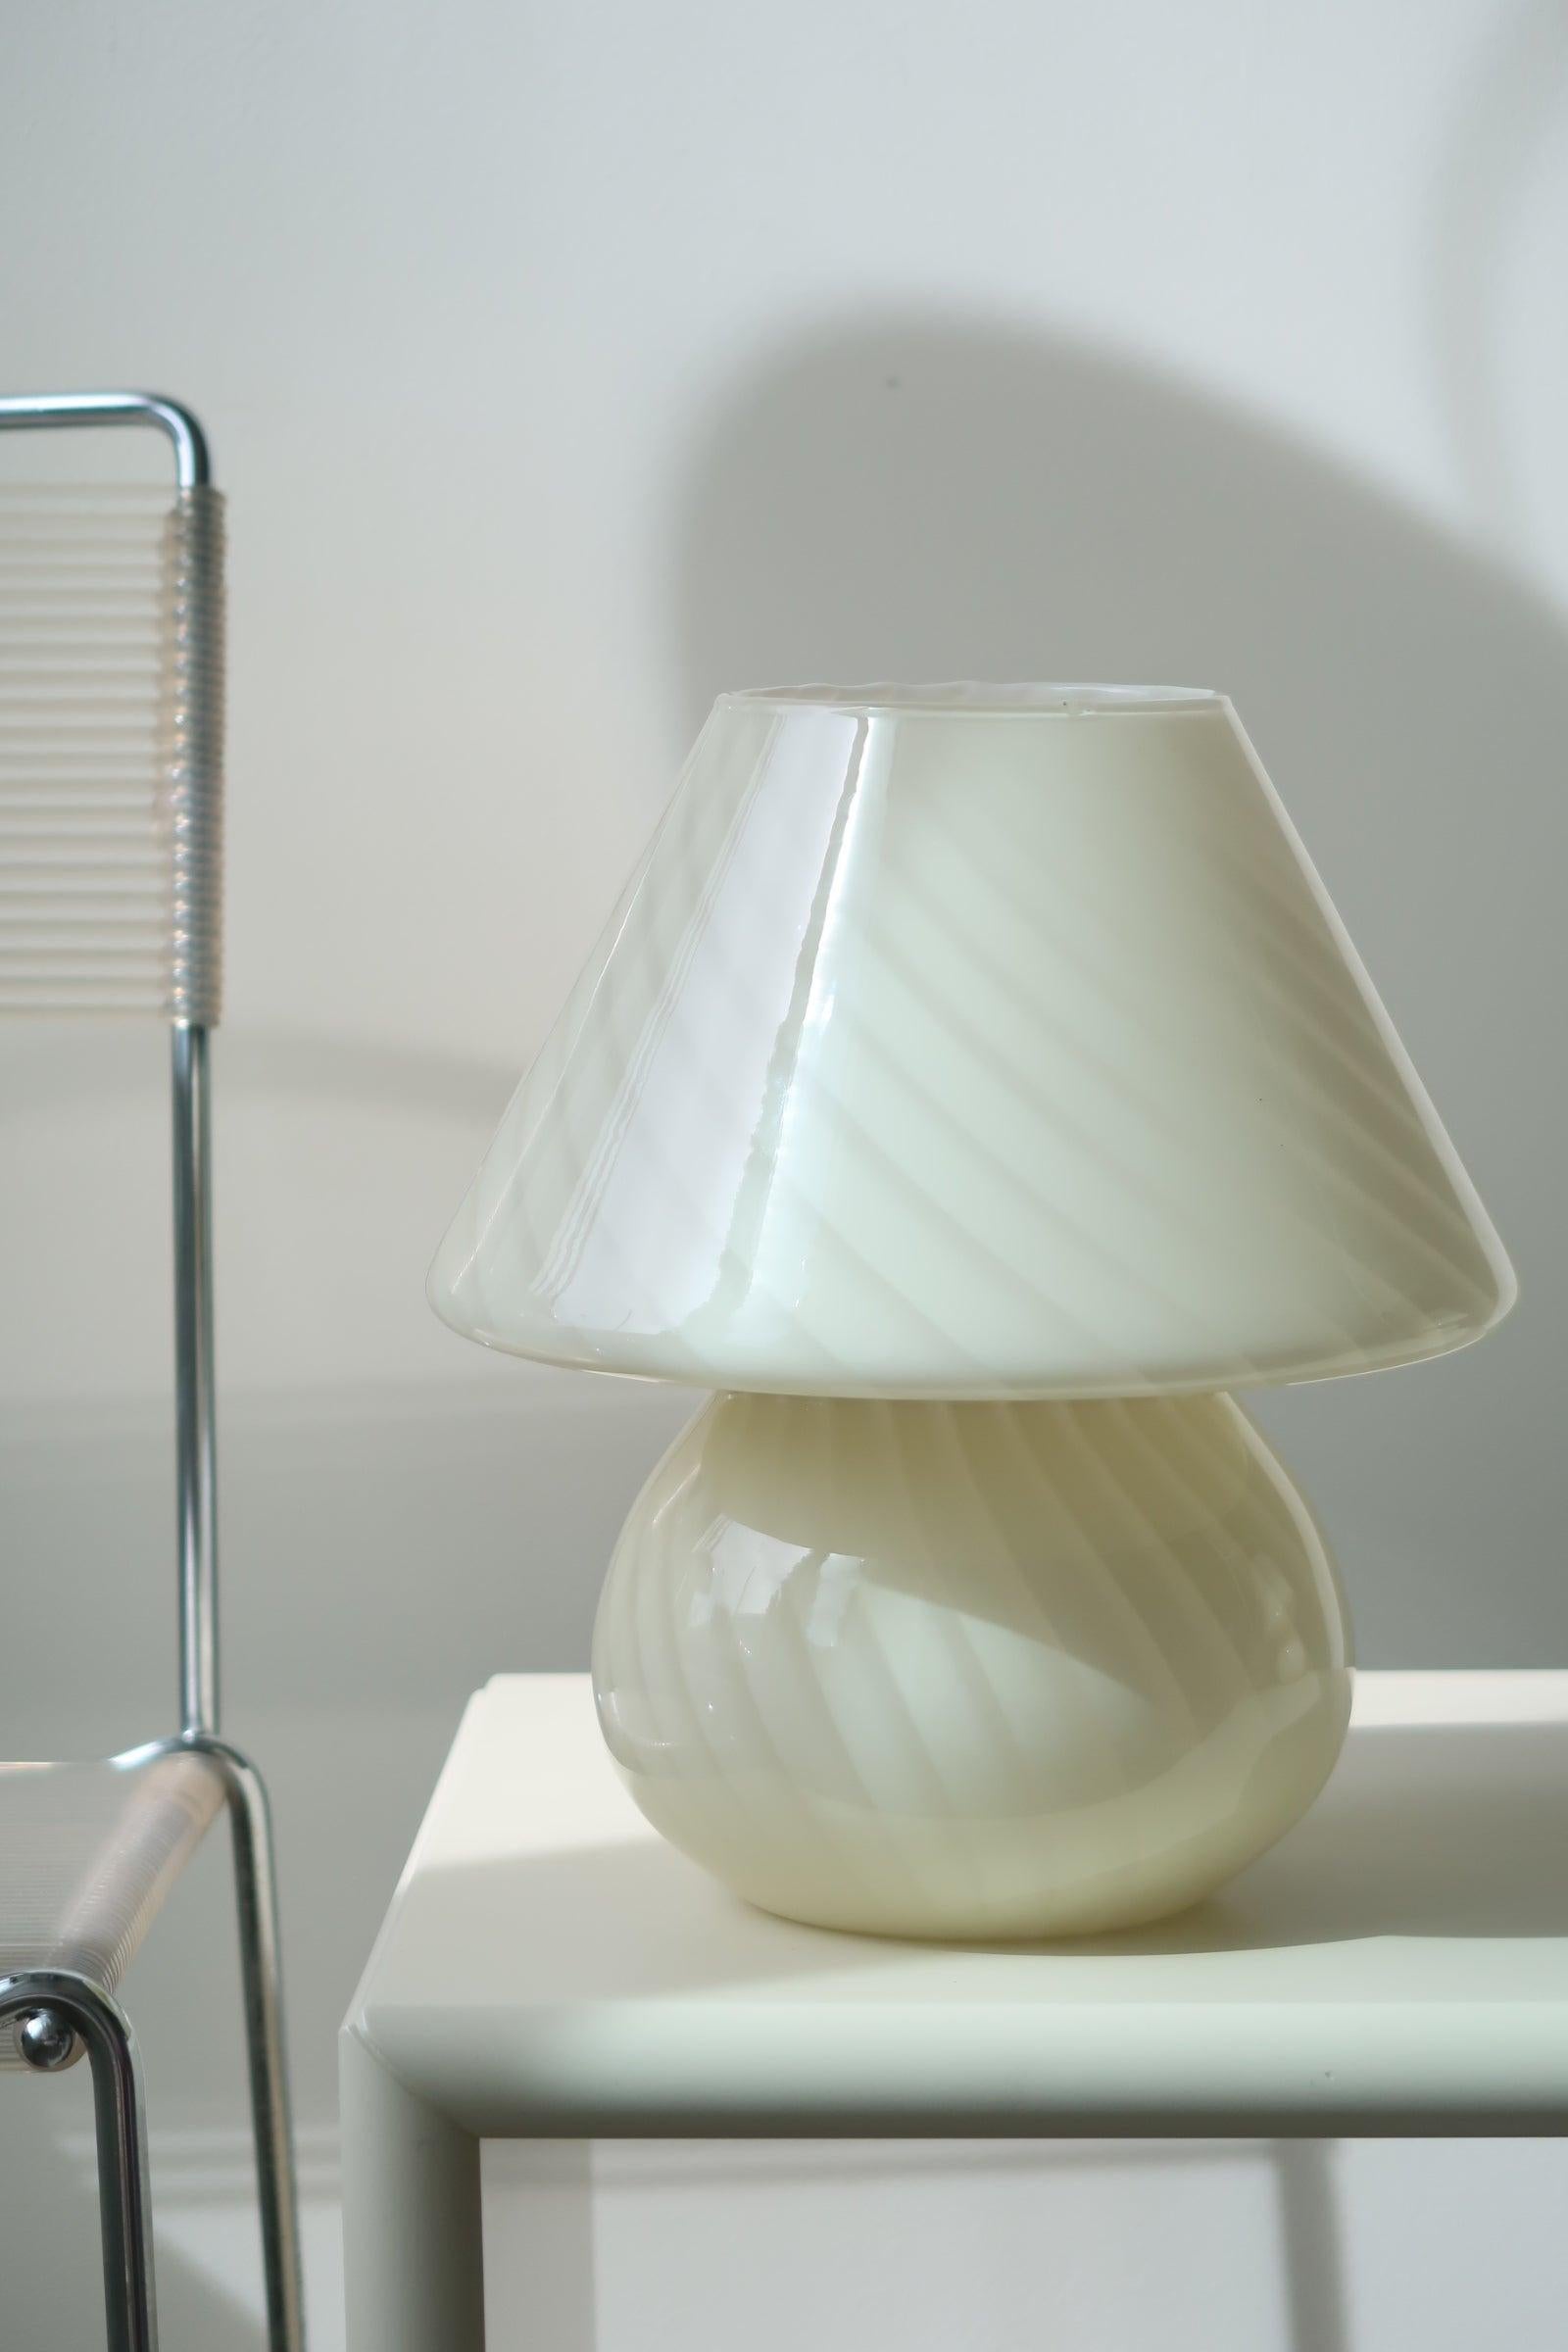 Vintage medium Murano mushroom table lamp in a beautiful, delicate cream yellow shade. Mouth blown in one piece of glass with a swirl pattern. Handmade in Italy, 1960s/70s, and comes with new white cord. ⁠H: 27 cm D: 24 cm⁠
